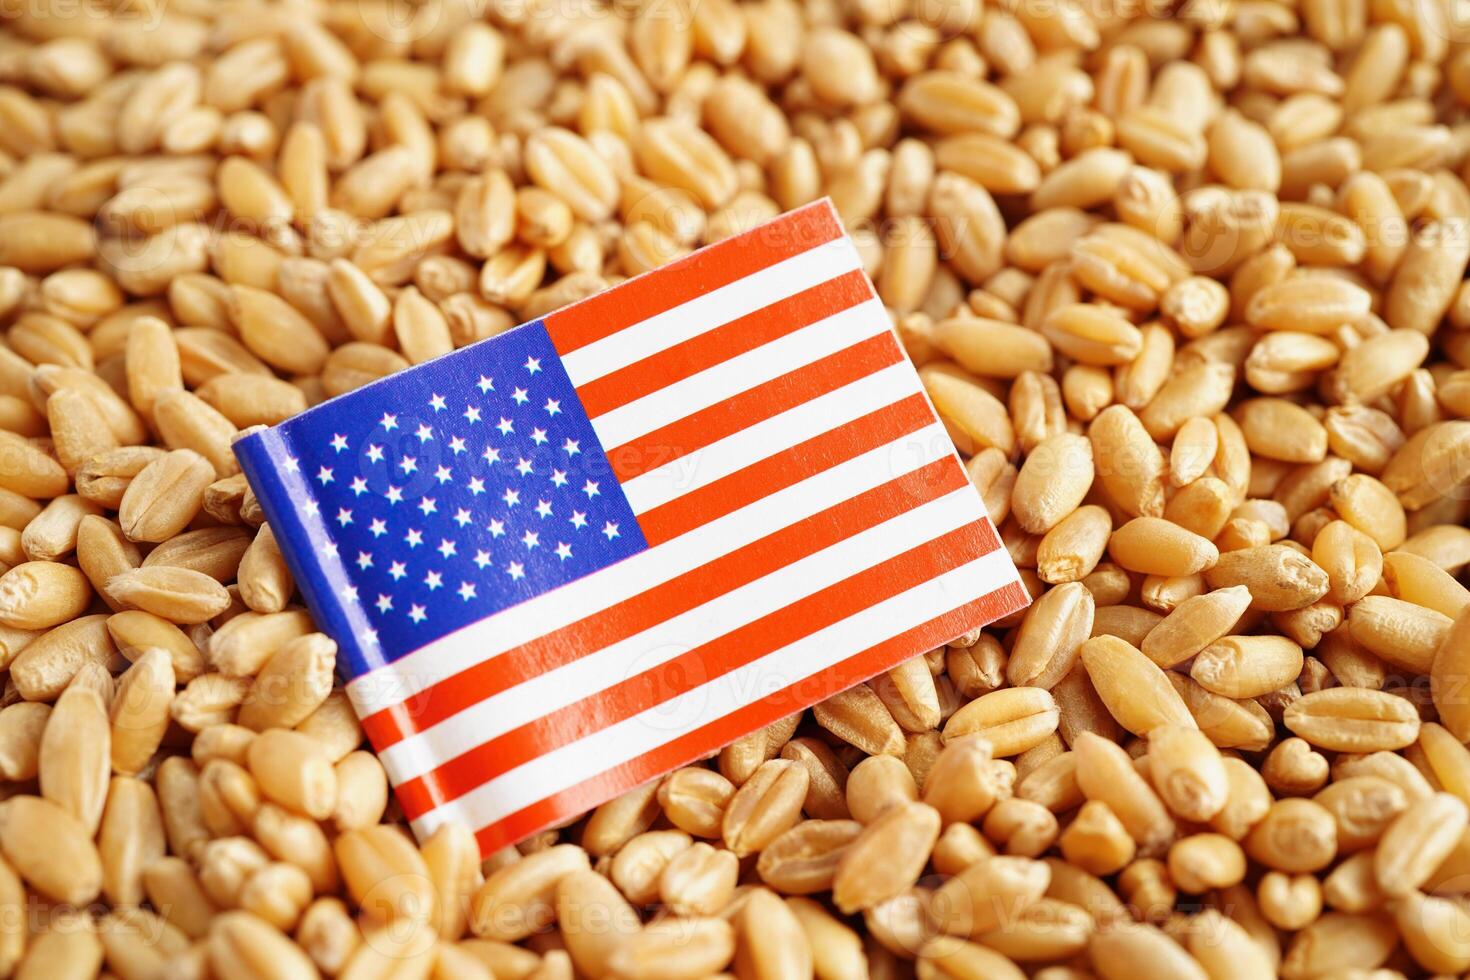 USA America flag on grain wheat, trade export and economy concept. photo